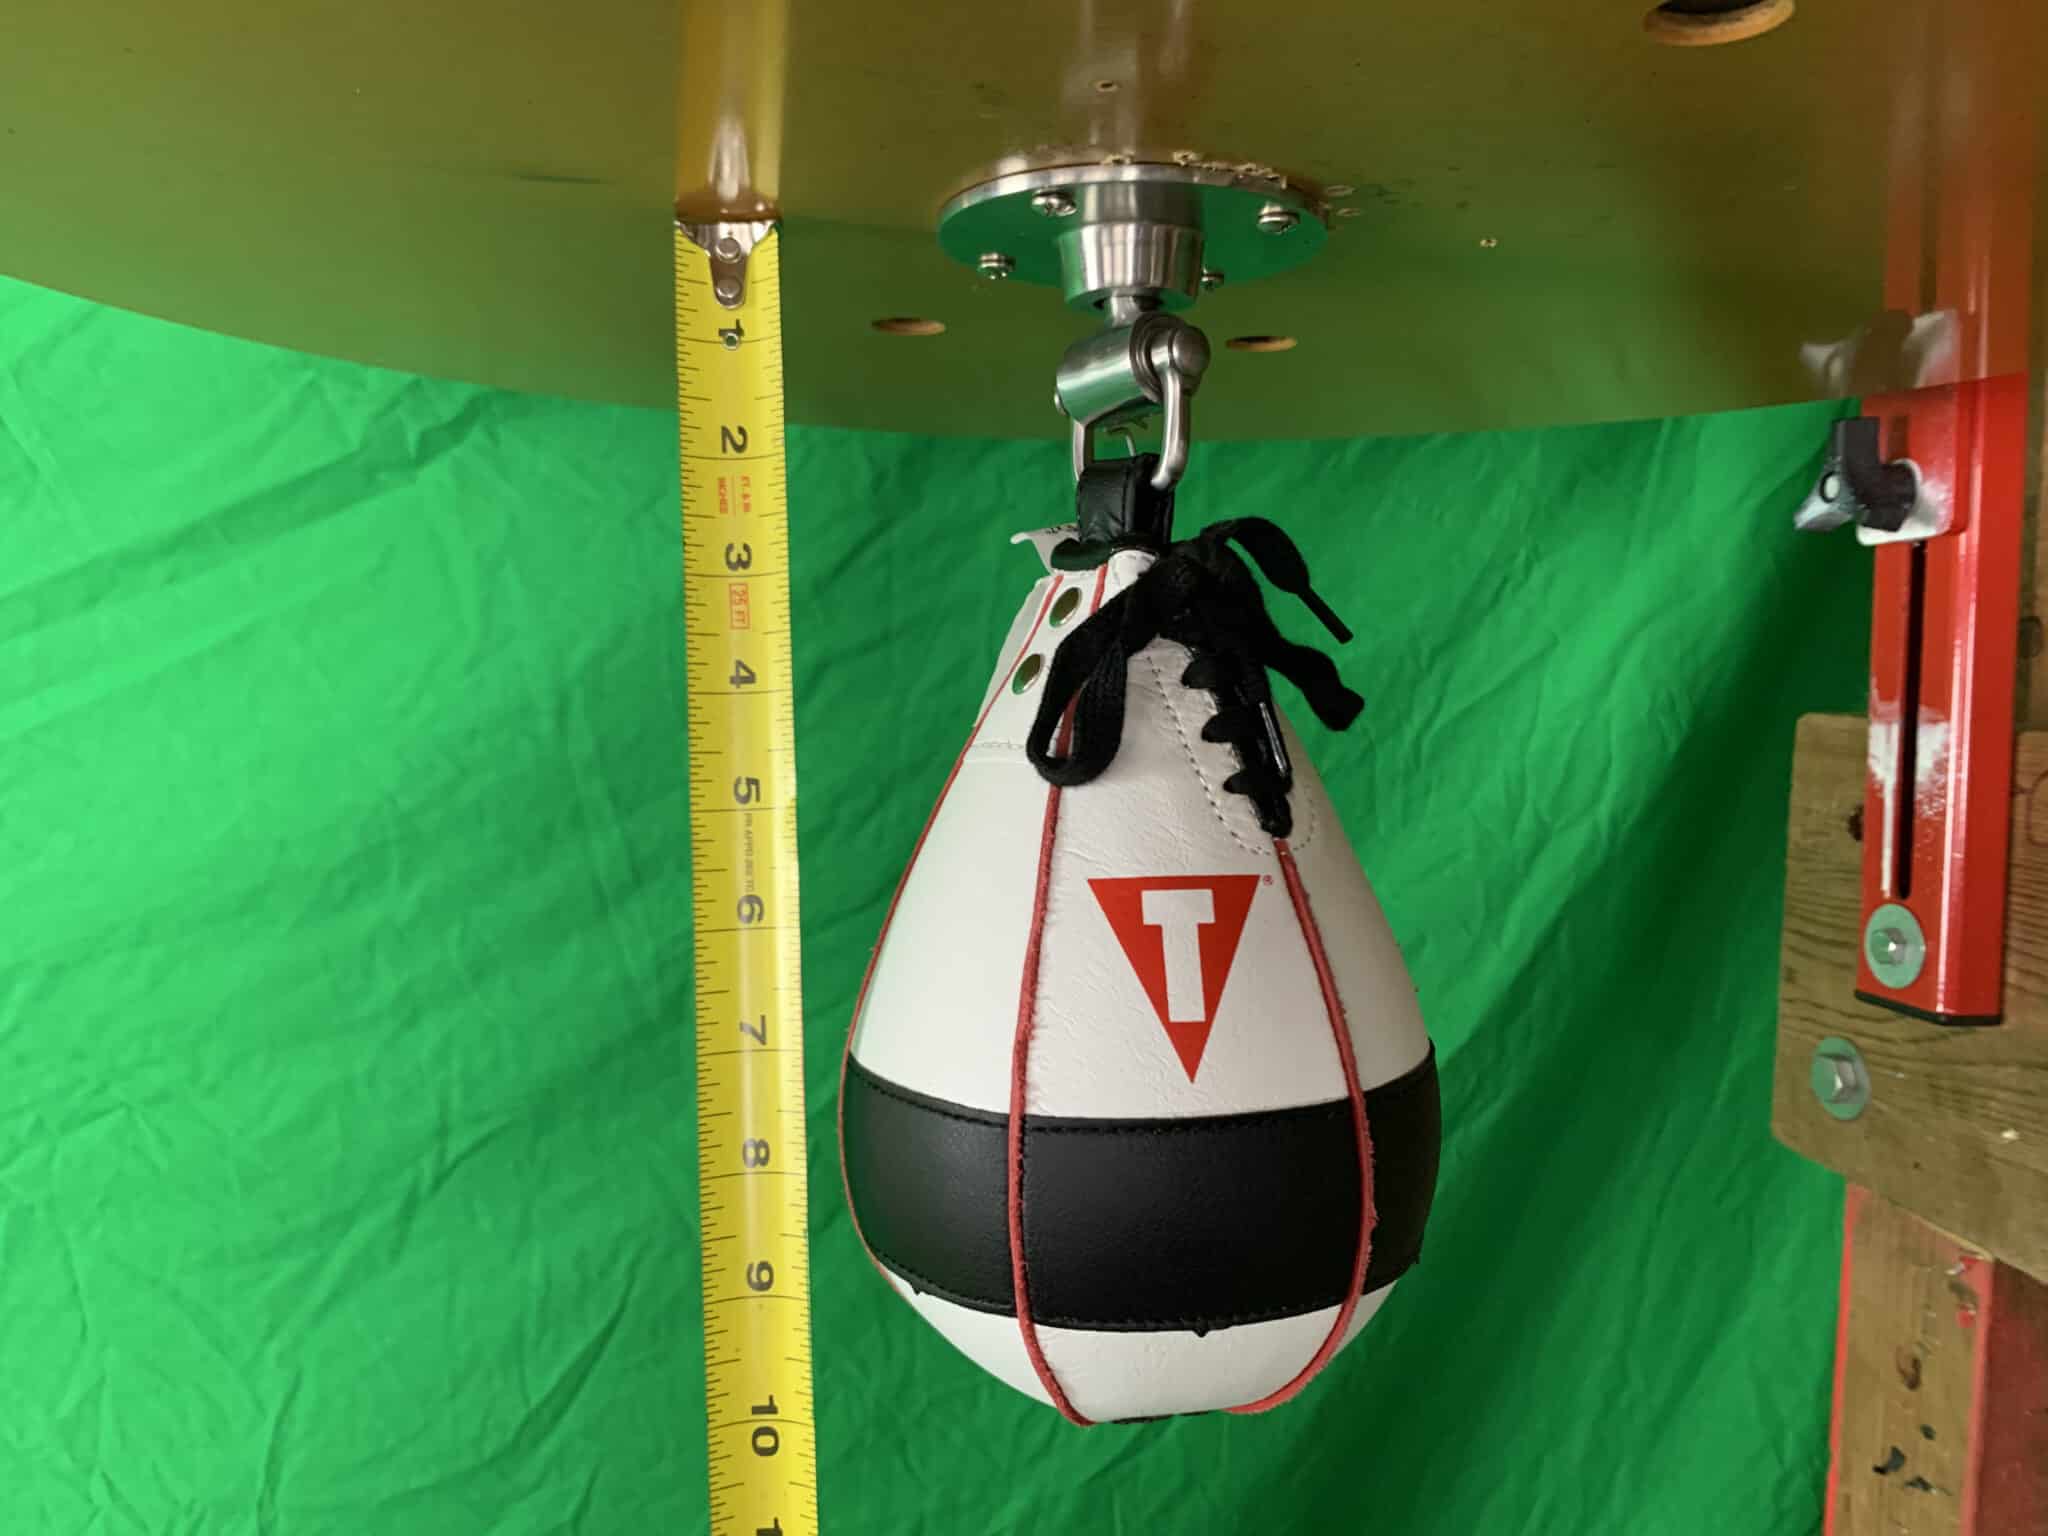 Title Lightning Fast Speed Bag Review - Speed Bag Labs